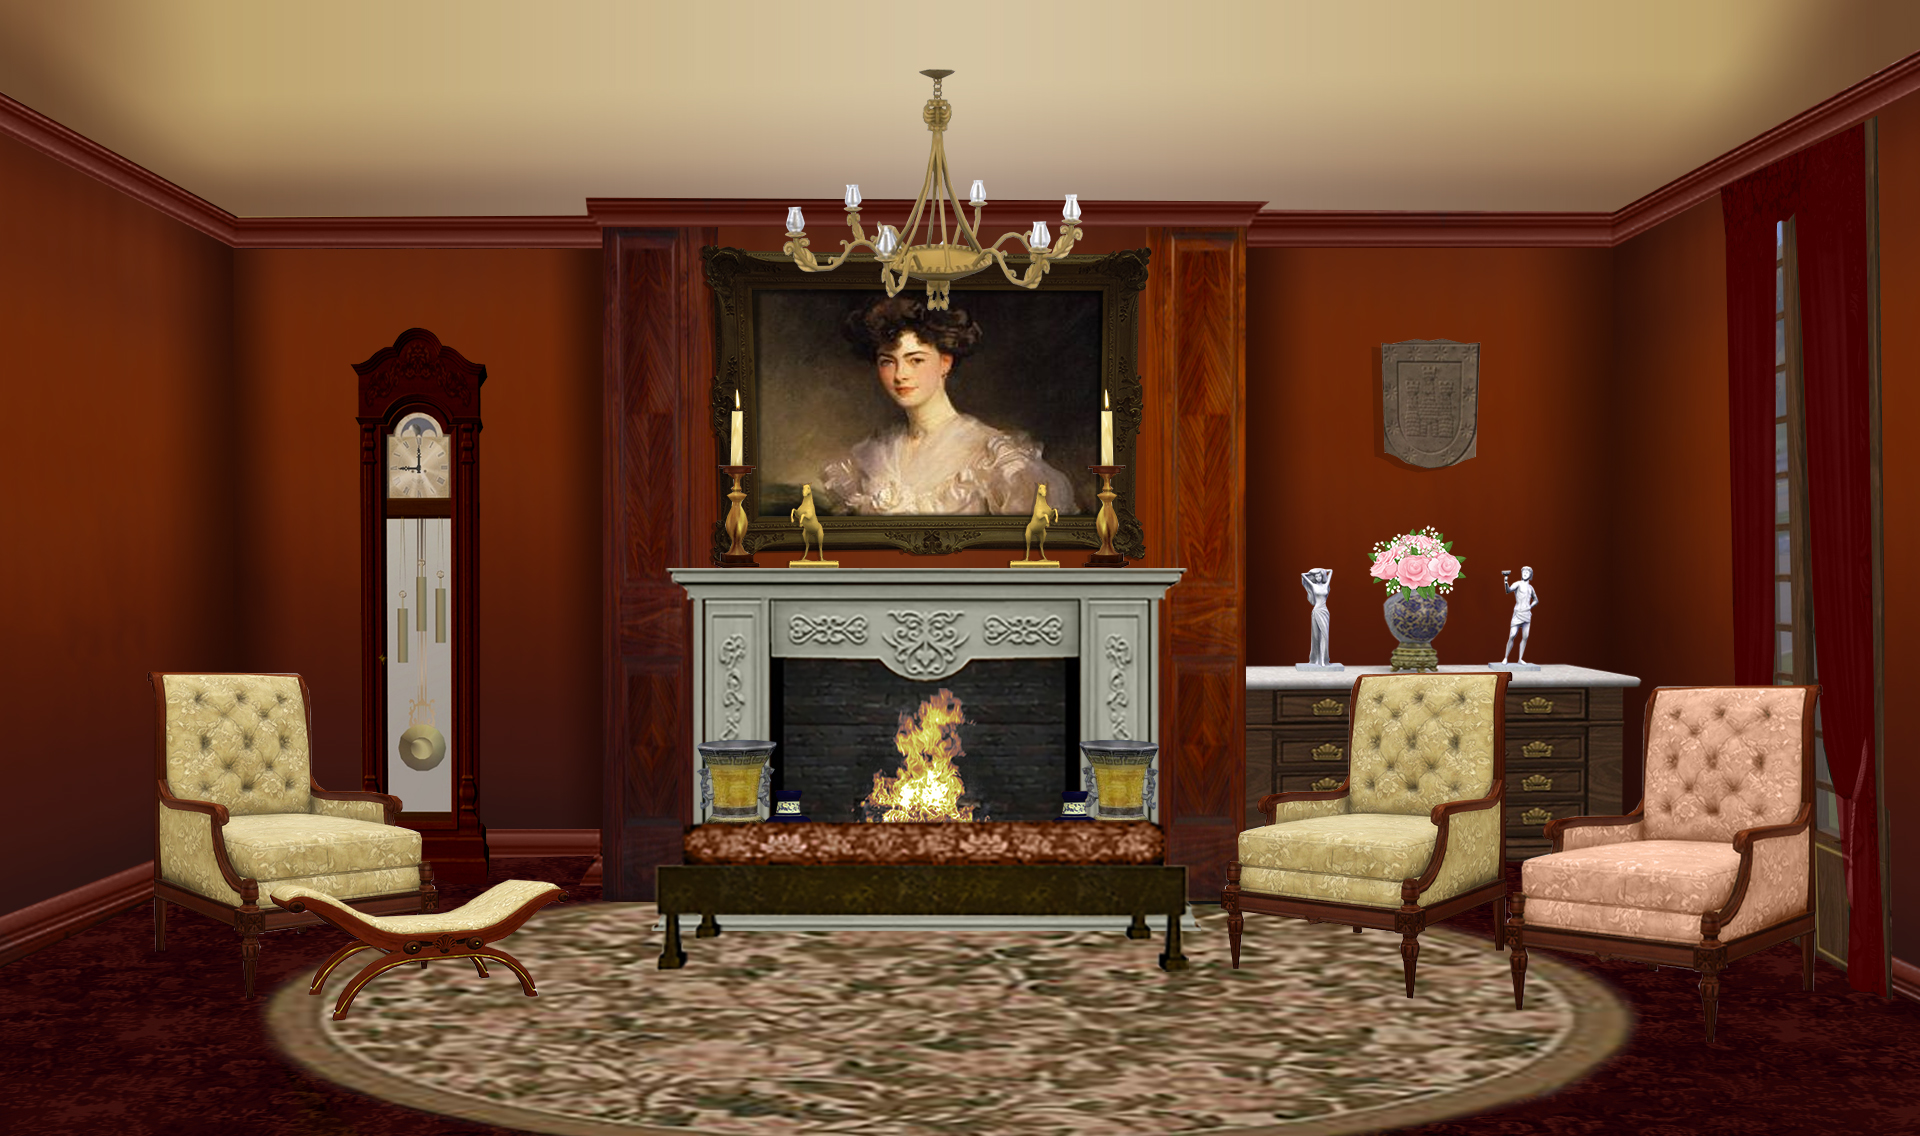 INT. VICTORIAN LIVING ROOM – DAY